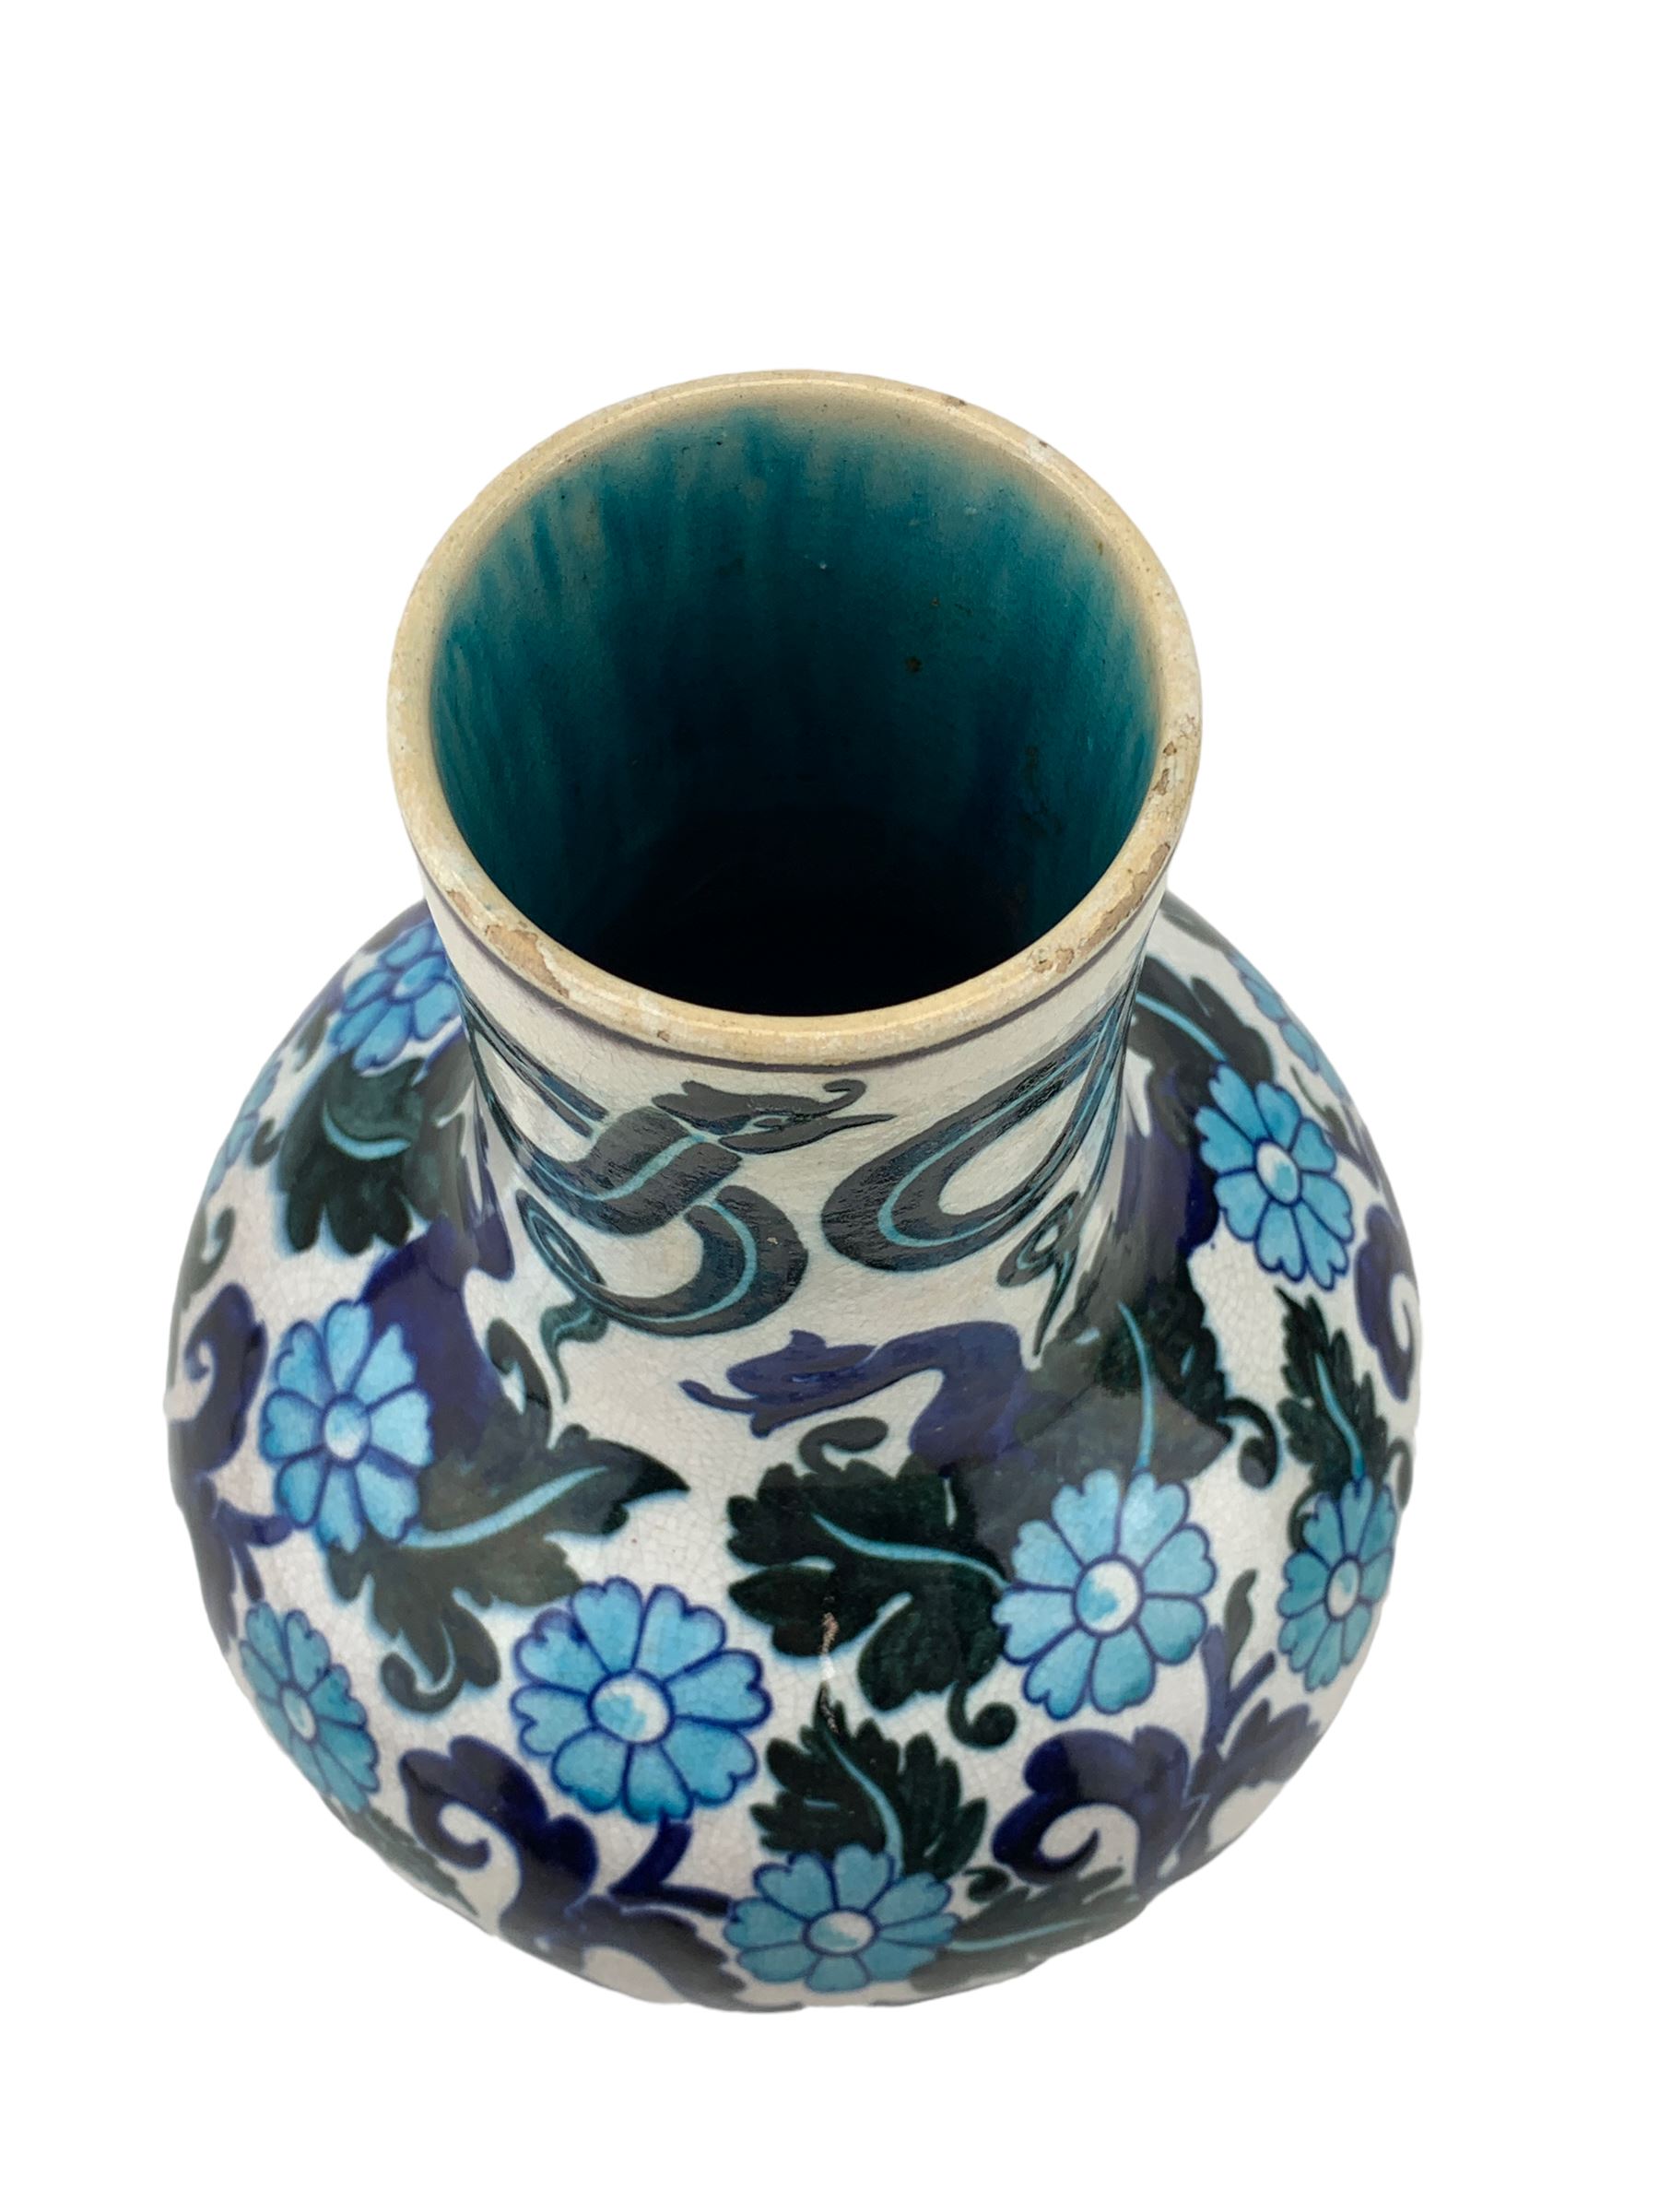 Burmantofts Faience Anglo-Persian bottle vase - Image 5 of 6